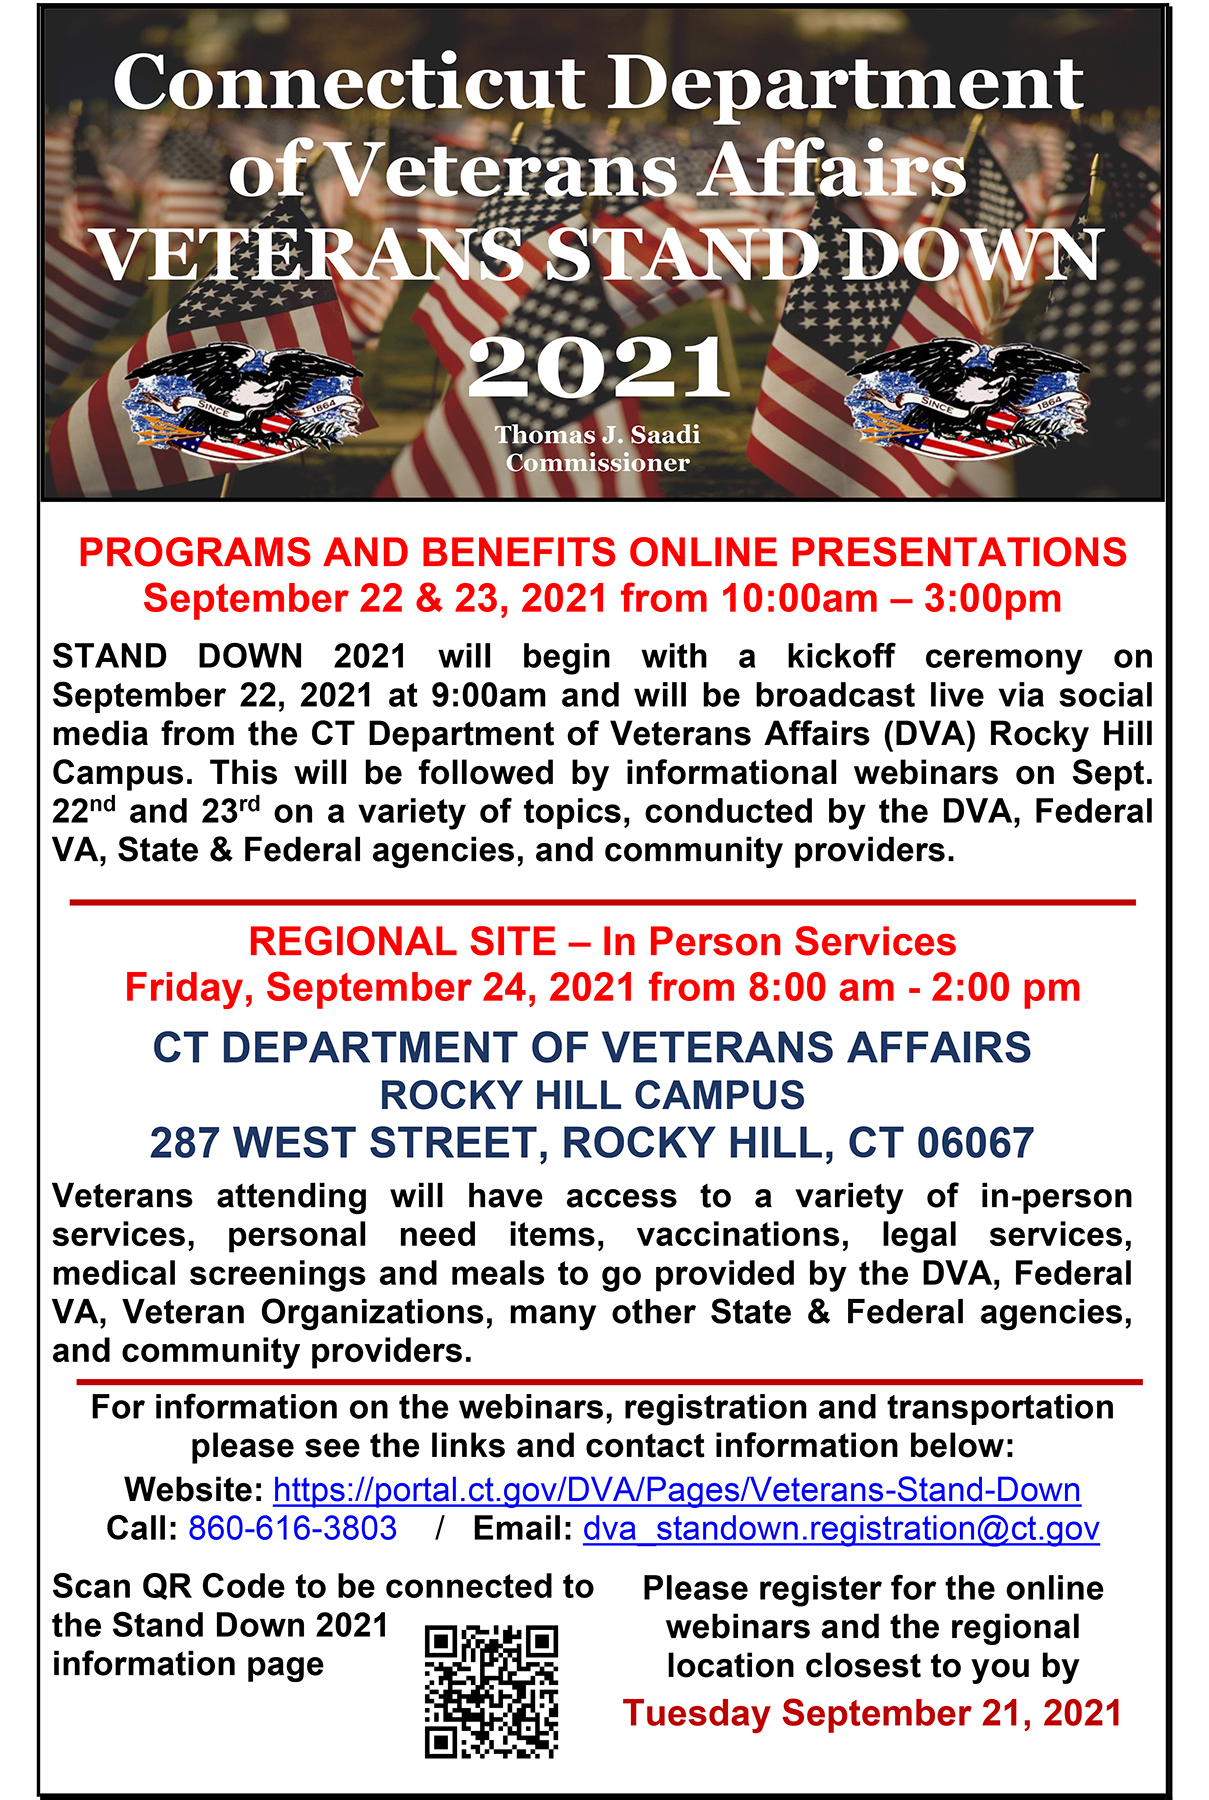 Veterans Stand Down 2021 September 22nd, 23rd, & 24th